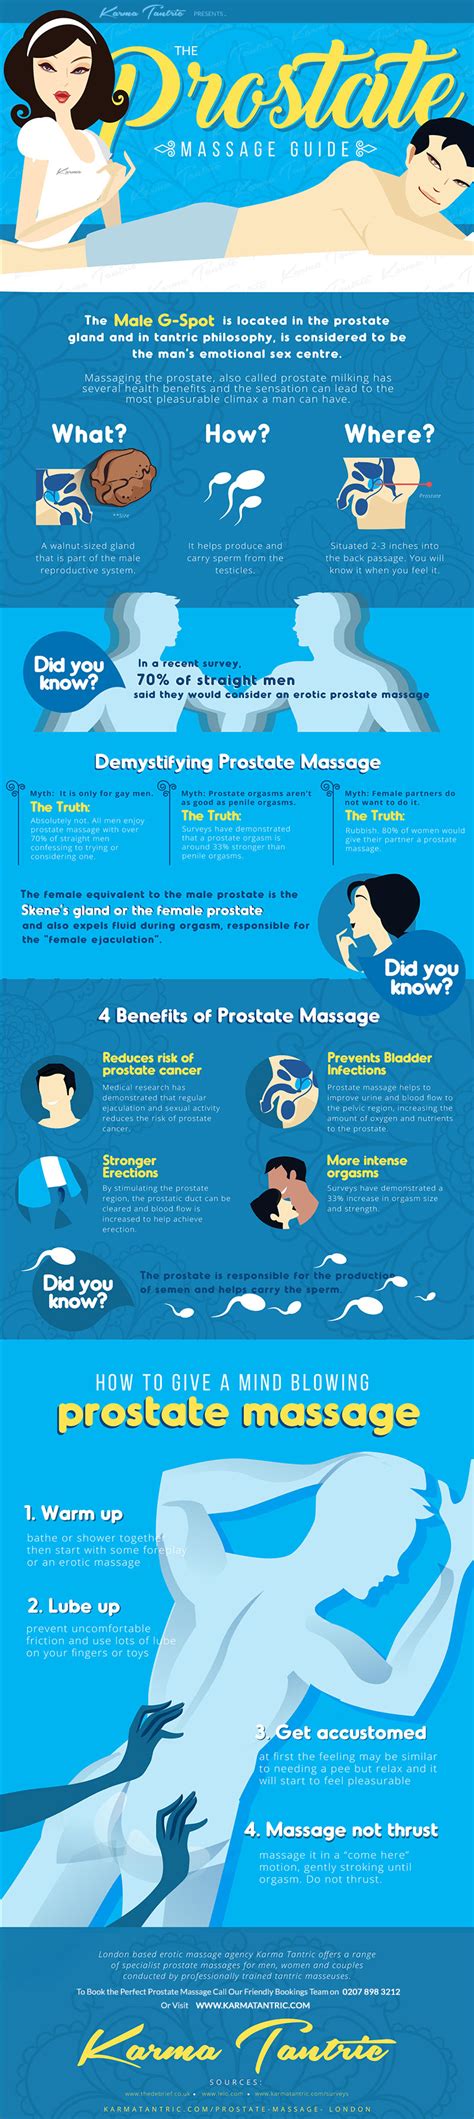 prostate milking 14 tips and positions to massage the prostate kienitvc ac ke